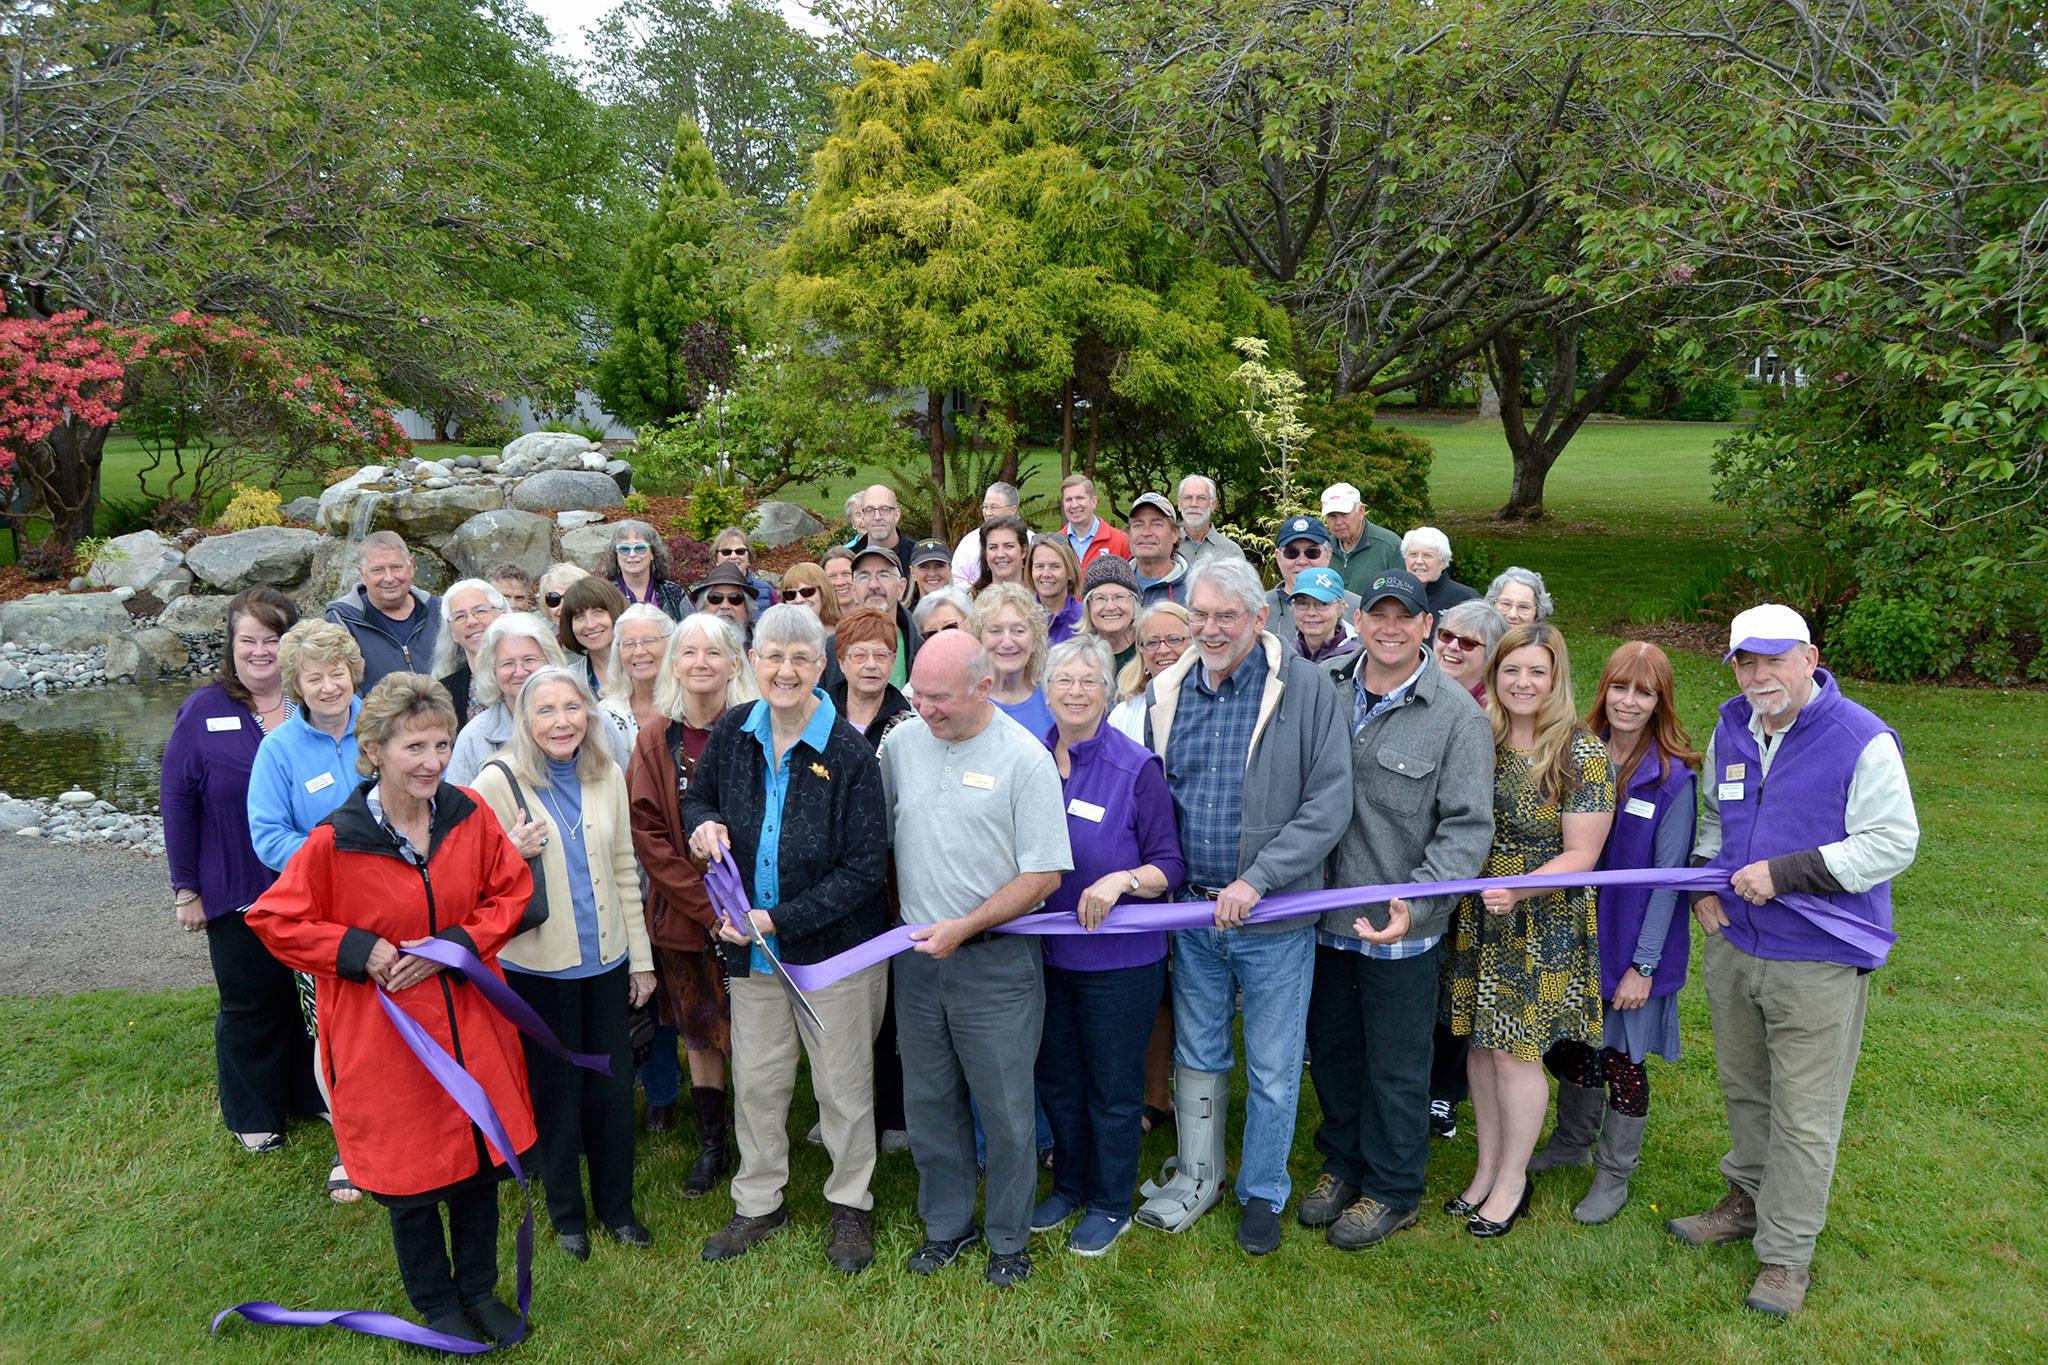 Priscilla Hudson, Sequim Prairie Garden Club member/historian, cuts the ribbon on May 16 to the refurbished fountain in Pioneer Memorial Park. She’s surrounded by dozens of community members including family members of the Lotzgesell family with Henry Lotzgesell donating a sizable amount in 1965 in honor of his wife Hazel to see the project come to fruition. Sequim Gazette photo by Matthew Nash